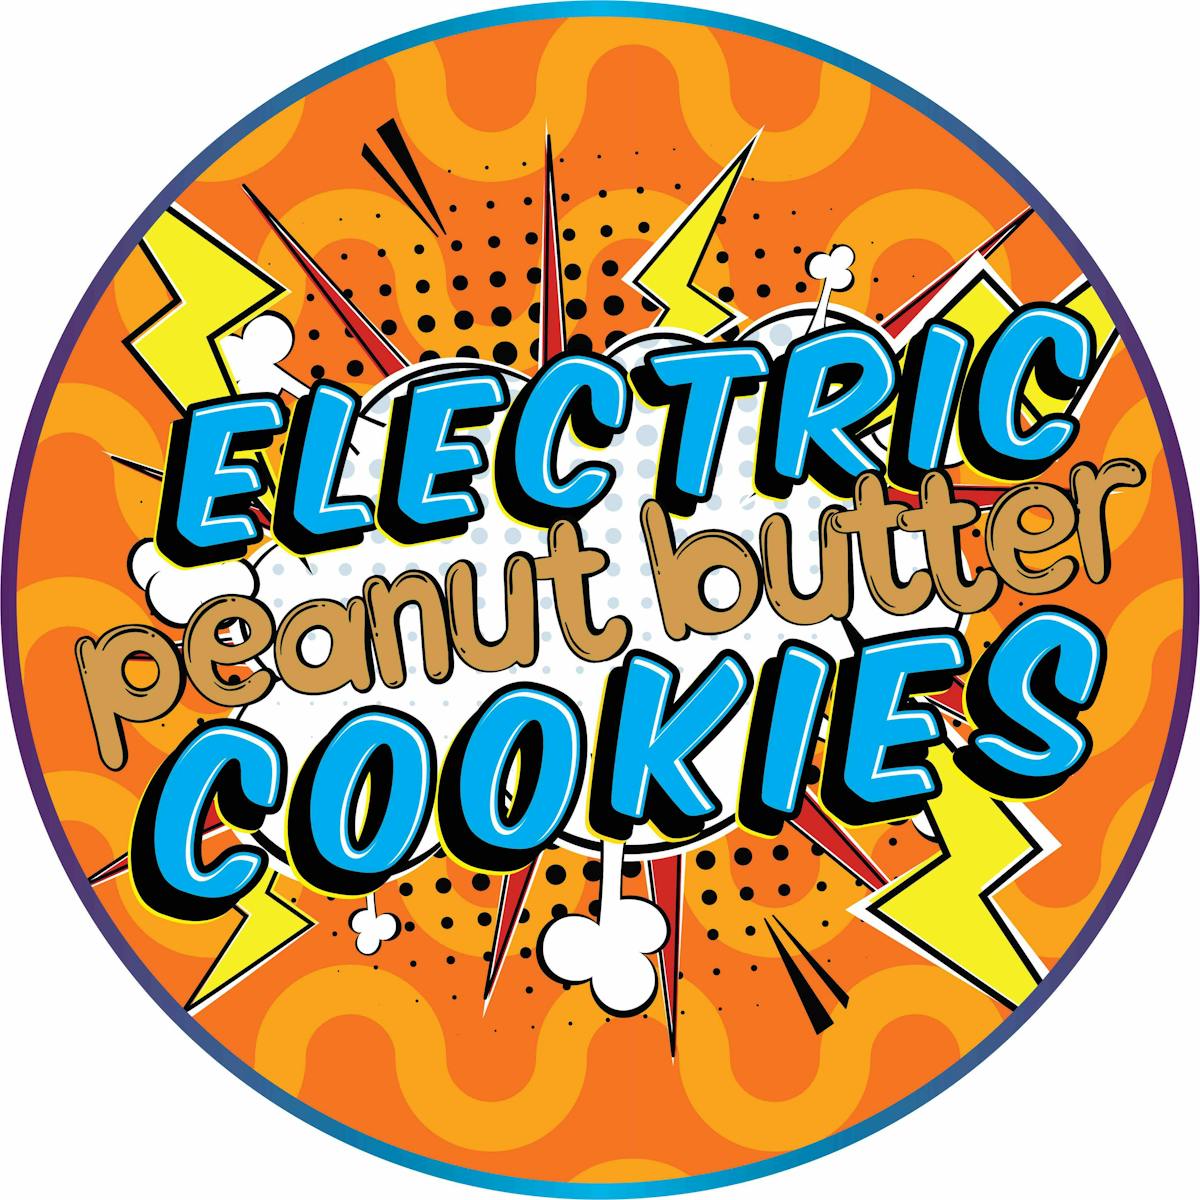 image of Electric Peanut Butter Cookies Shake